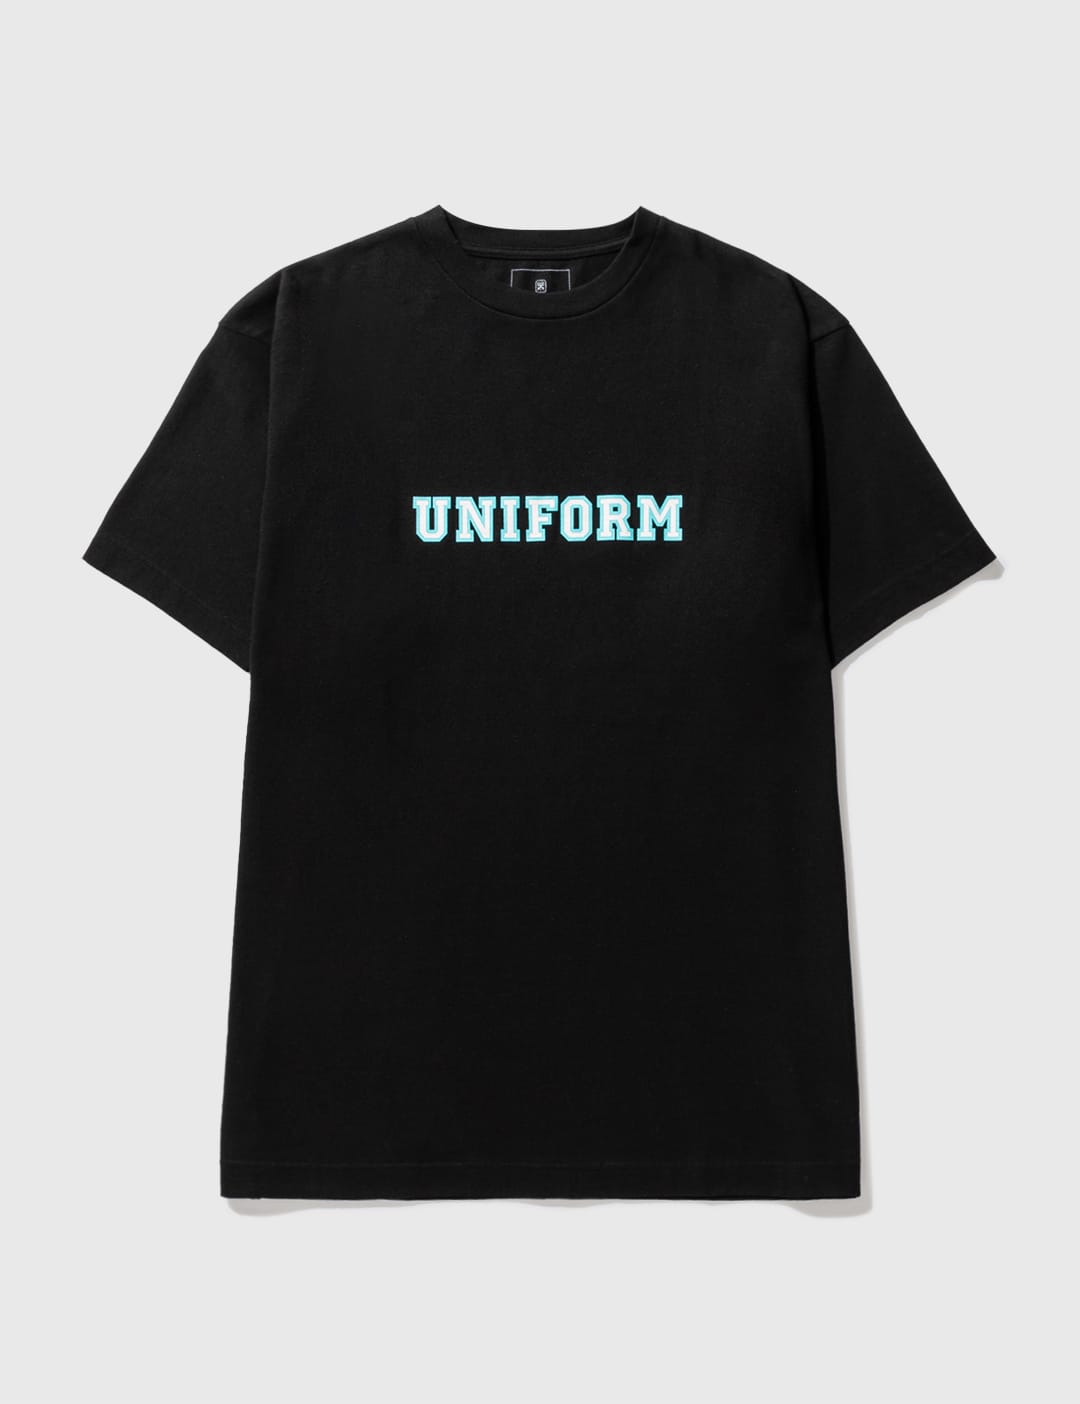 uniform experiment | HBX - Globally Curated Fashion and Lifestyle 